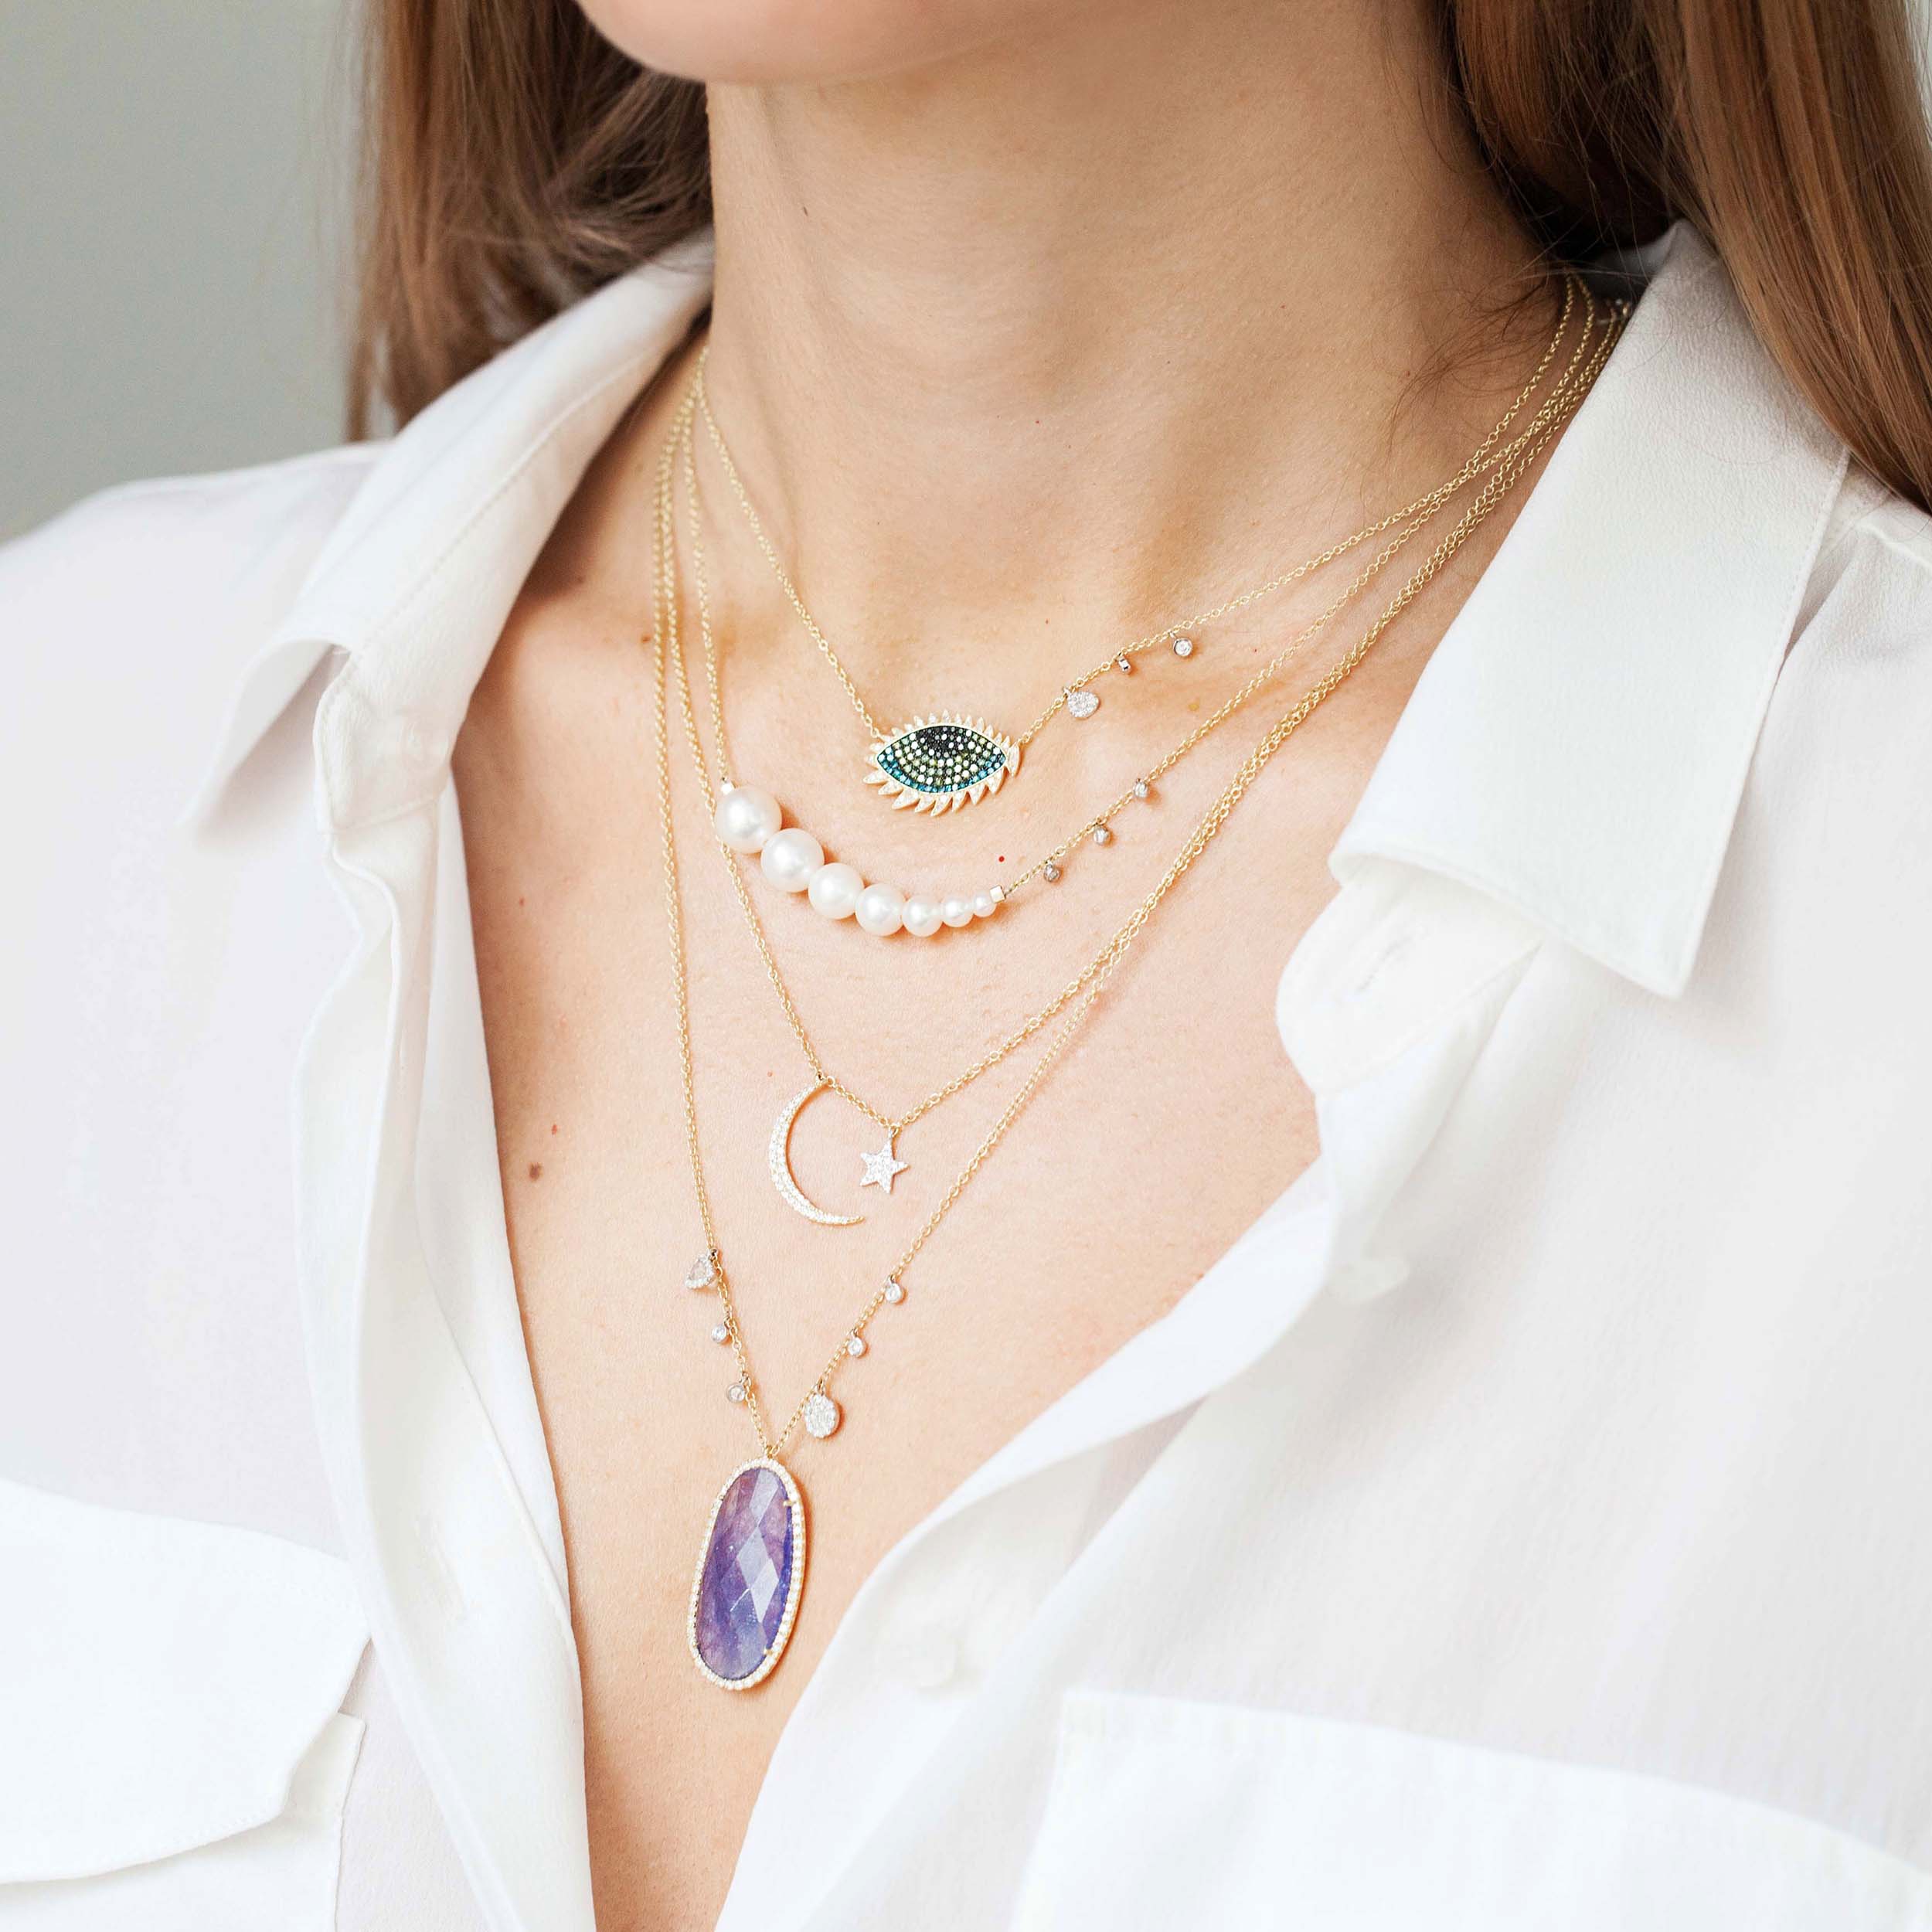 THE ART OF NECKLACE LAYERING BY LIZA URLA